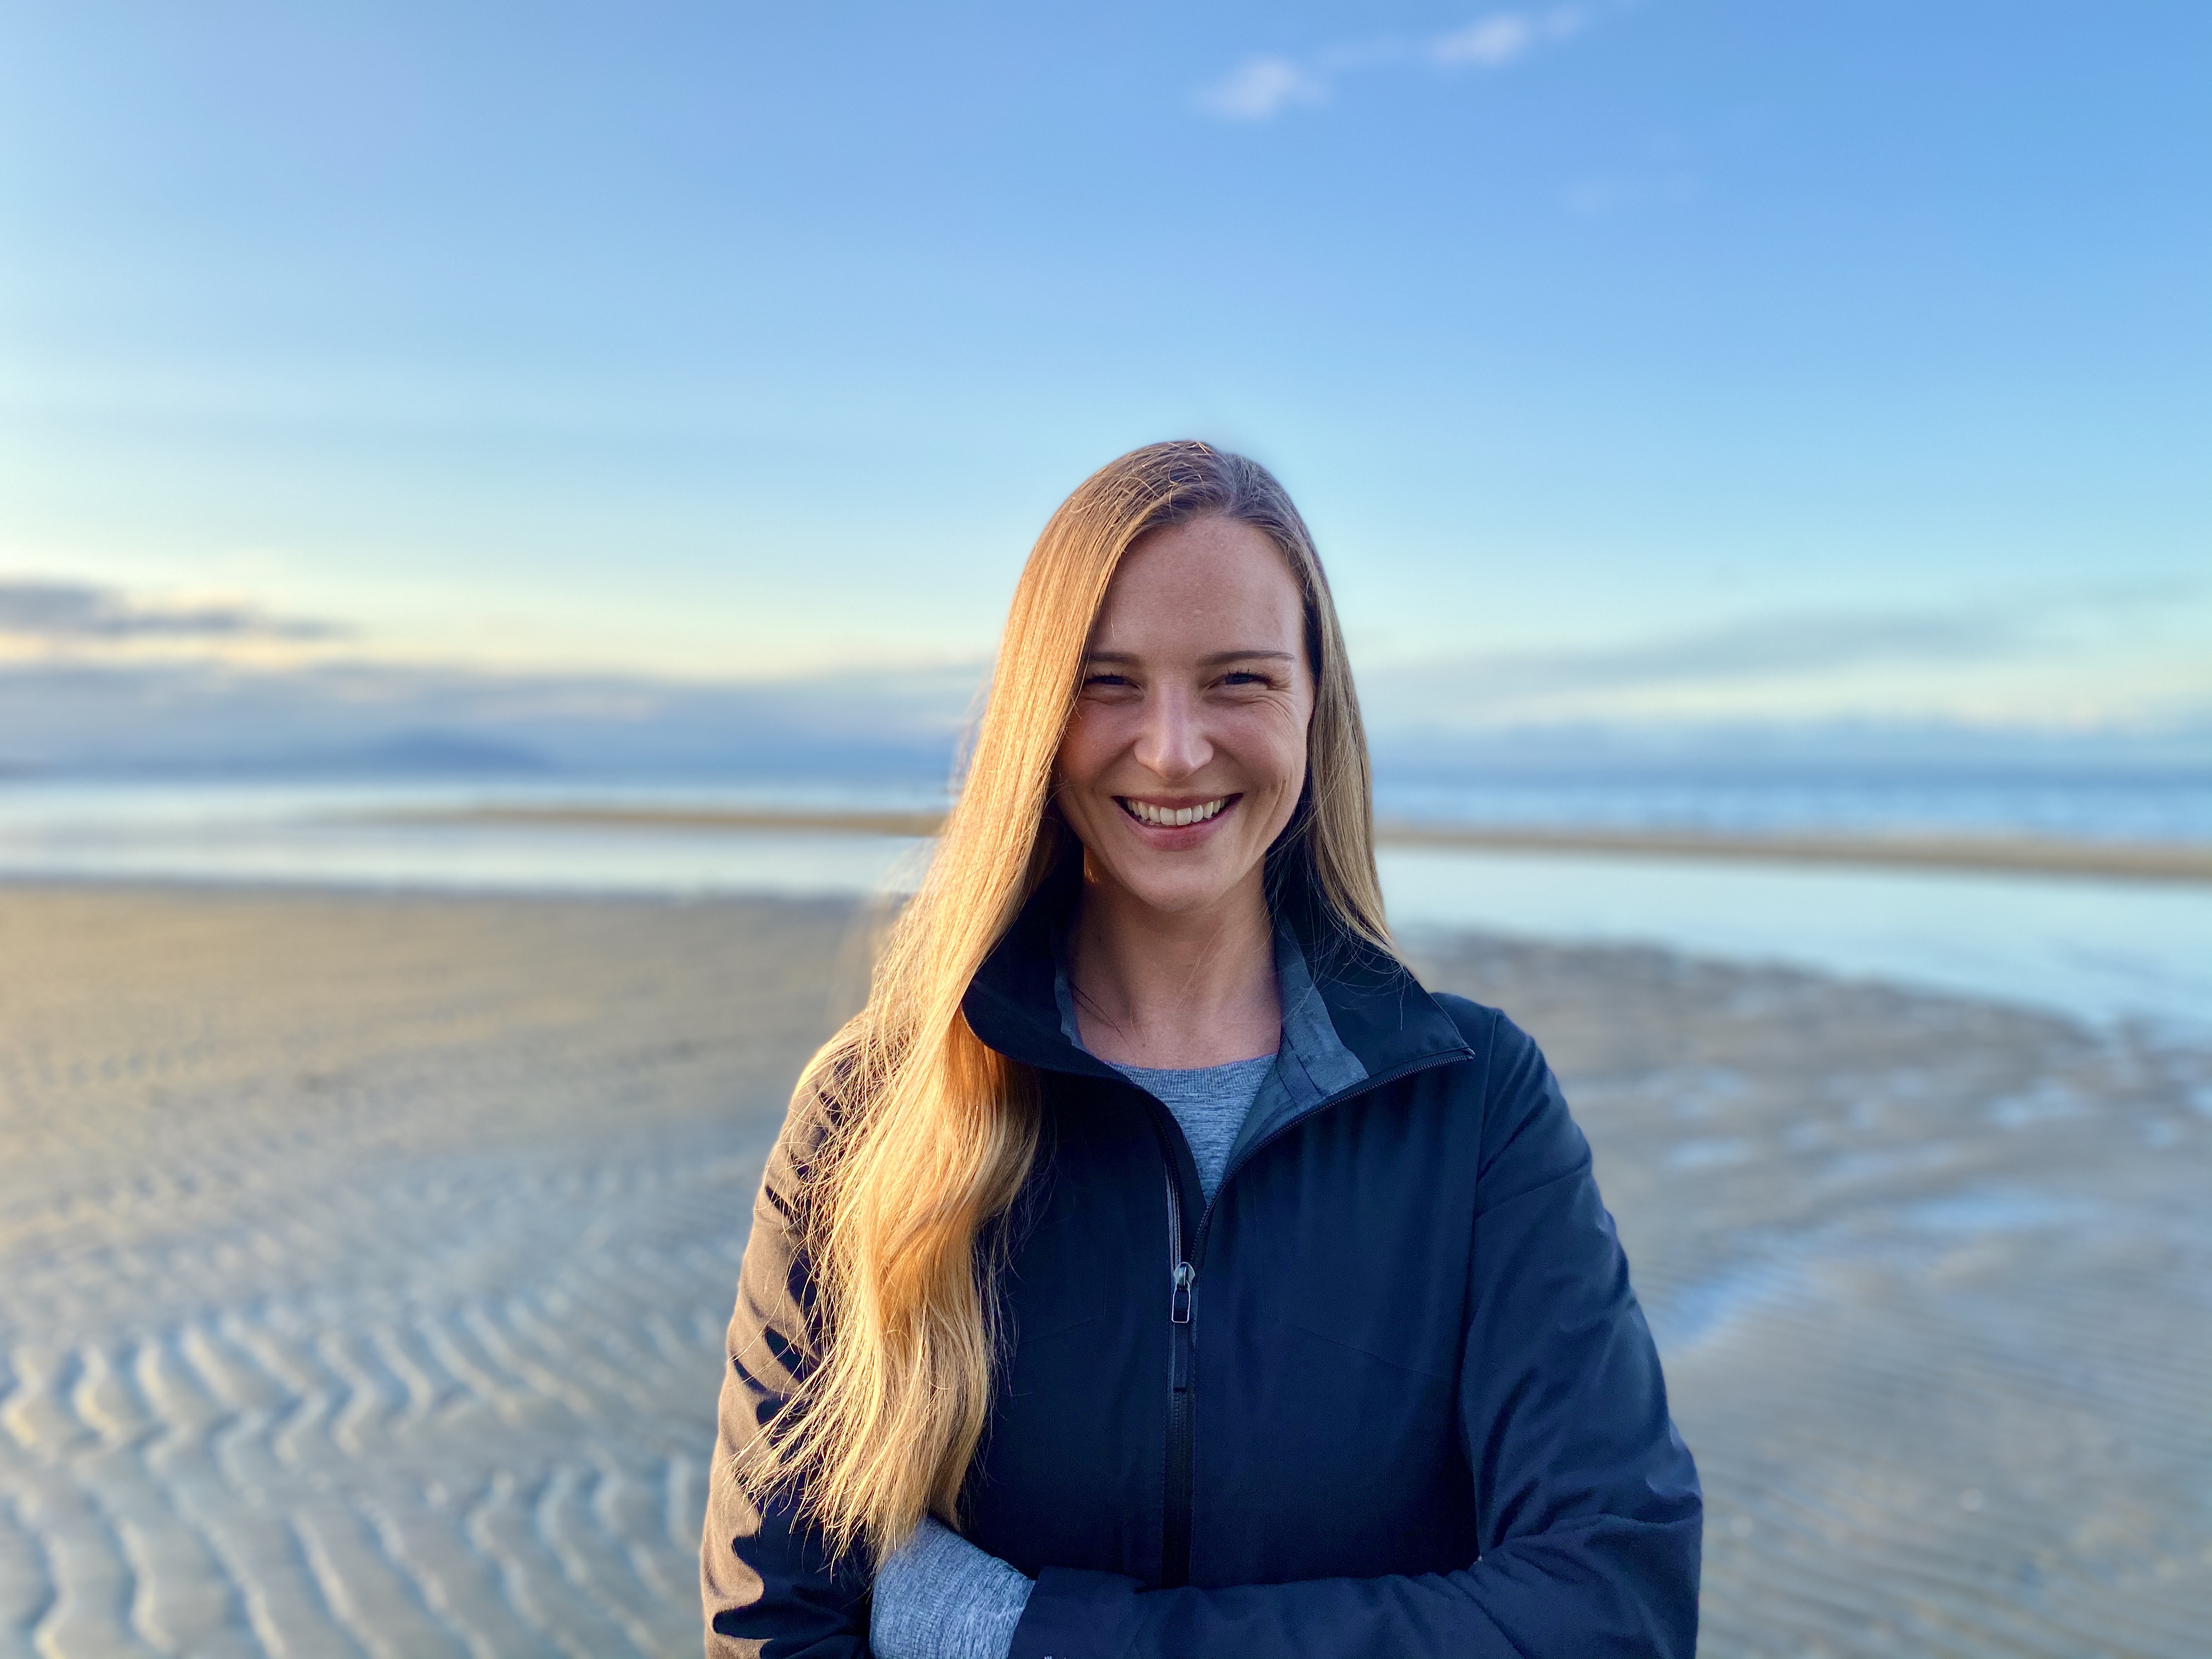 Alix Shield with long blonde hair wearing a navy jacket and grey sweater stands smiling outdoors on a sandy beach in front of a large body of water. 